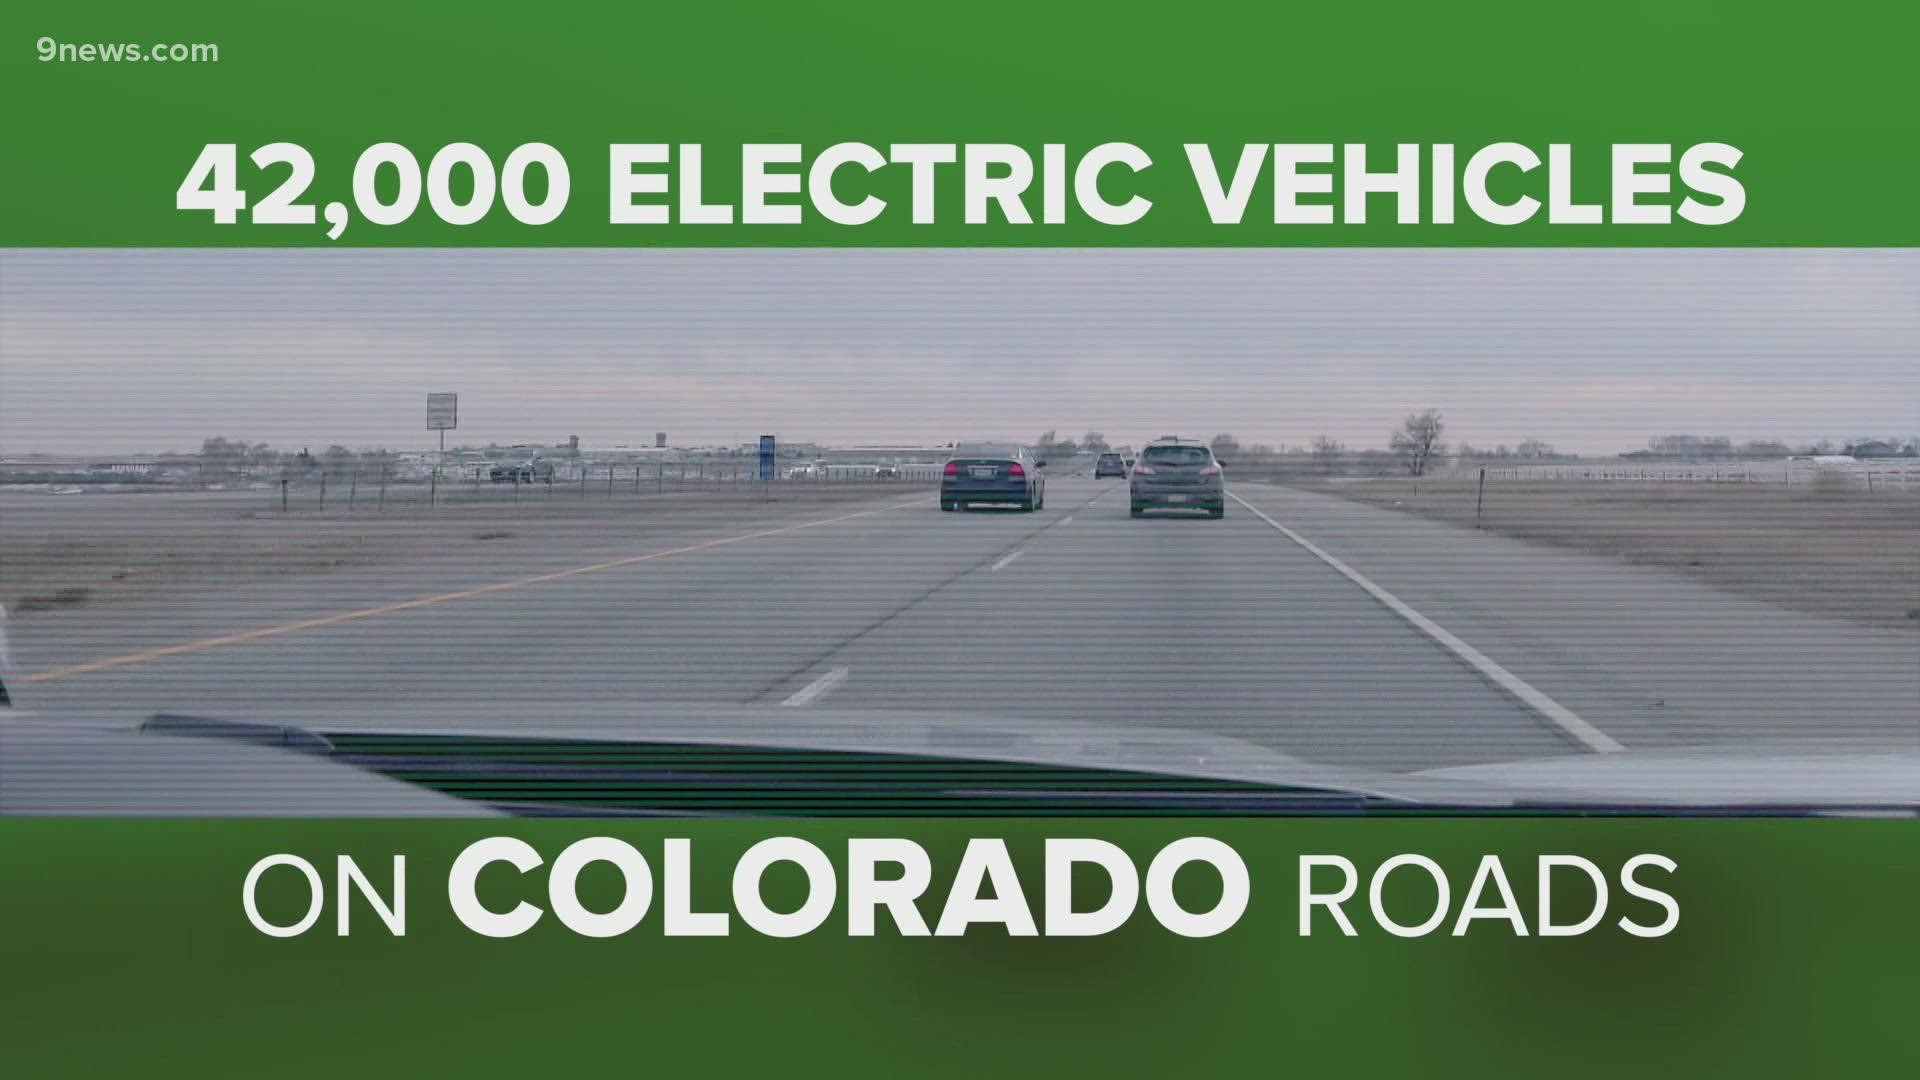 We talked with CDOT about the common misconceptions surrounding electric vehicles, and how they impact the environment and your wallet.